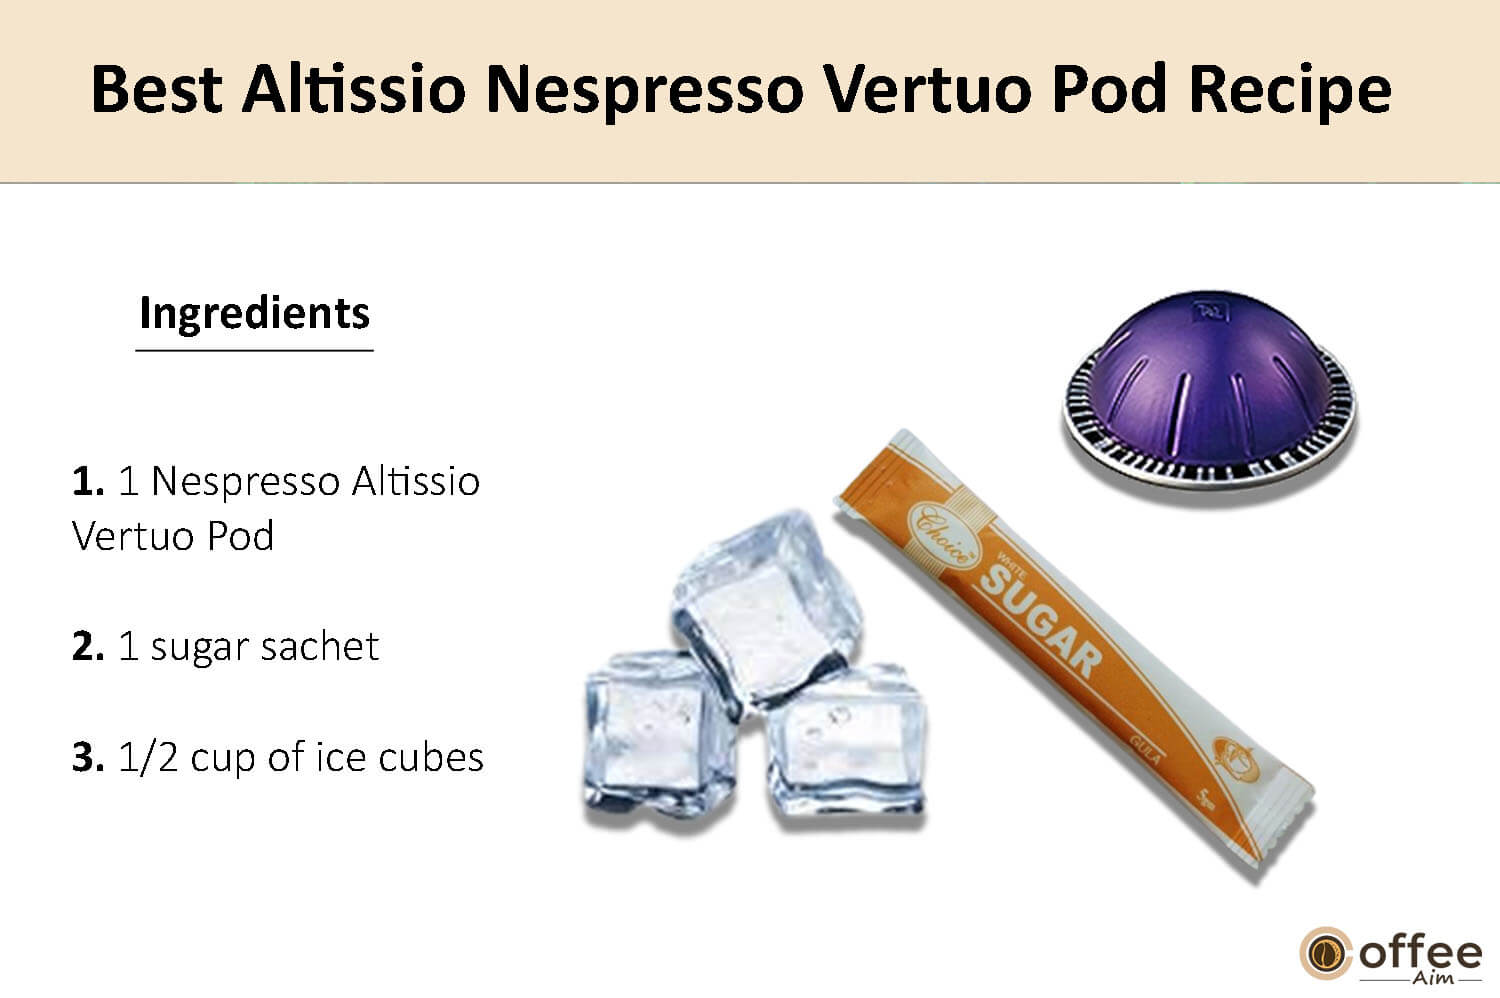 In this image, I elucidate the components that comprise the finest Altissio Nespresso Vertuo coffee pod.